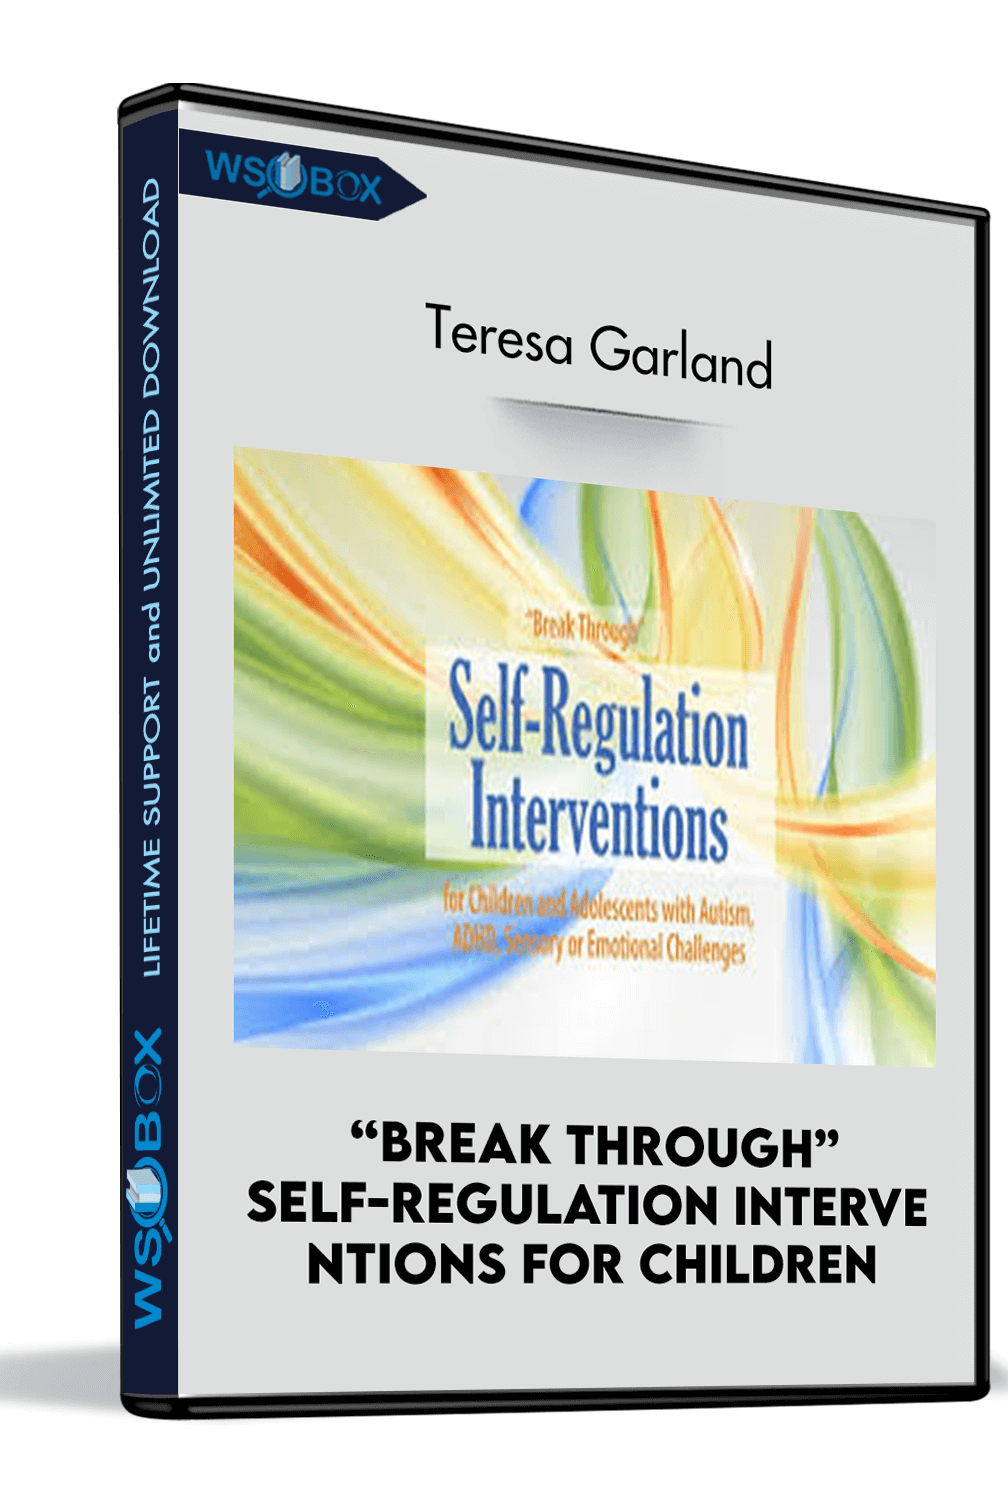 “Break Through” Self-Regulation Interve ntions for Children and Adolescents with Autism, ADHD, Sensory or Emotional Challenges - Teresa Garland